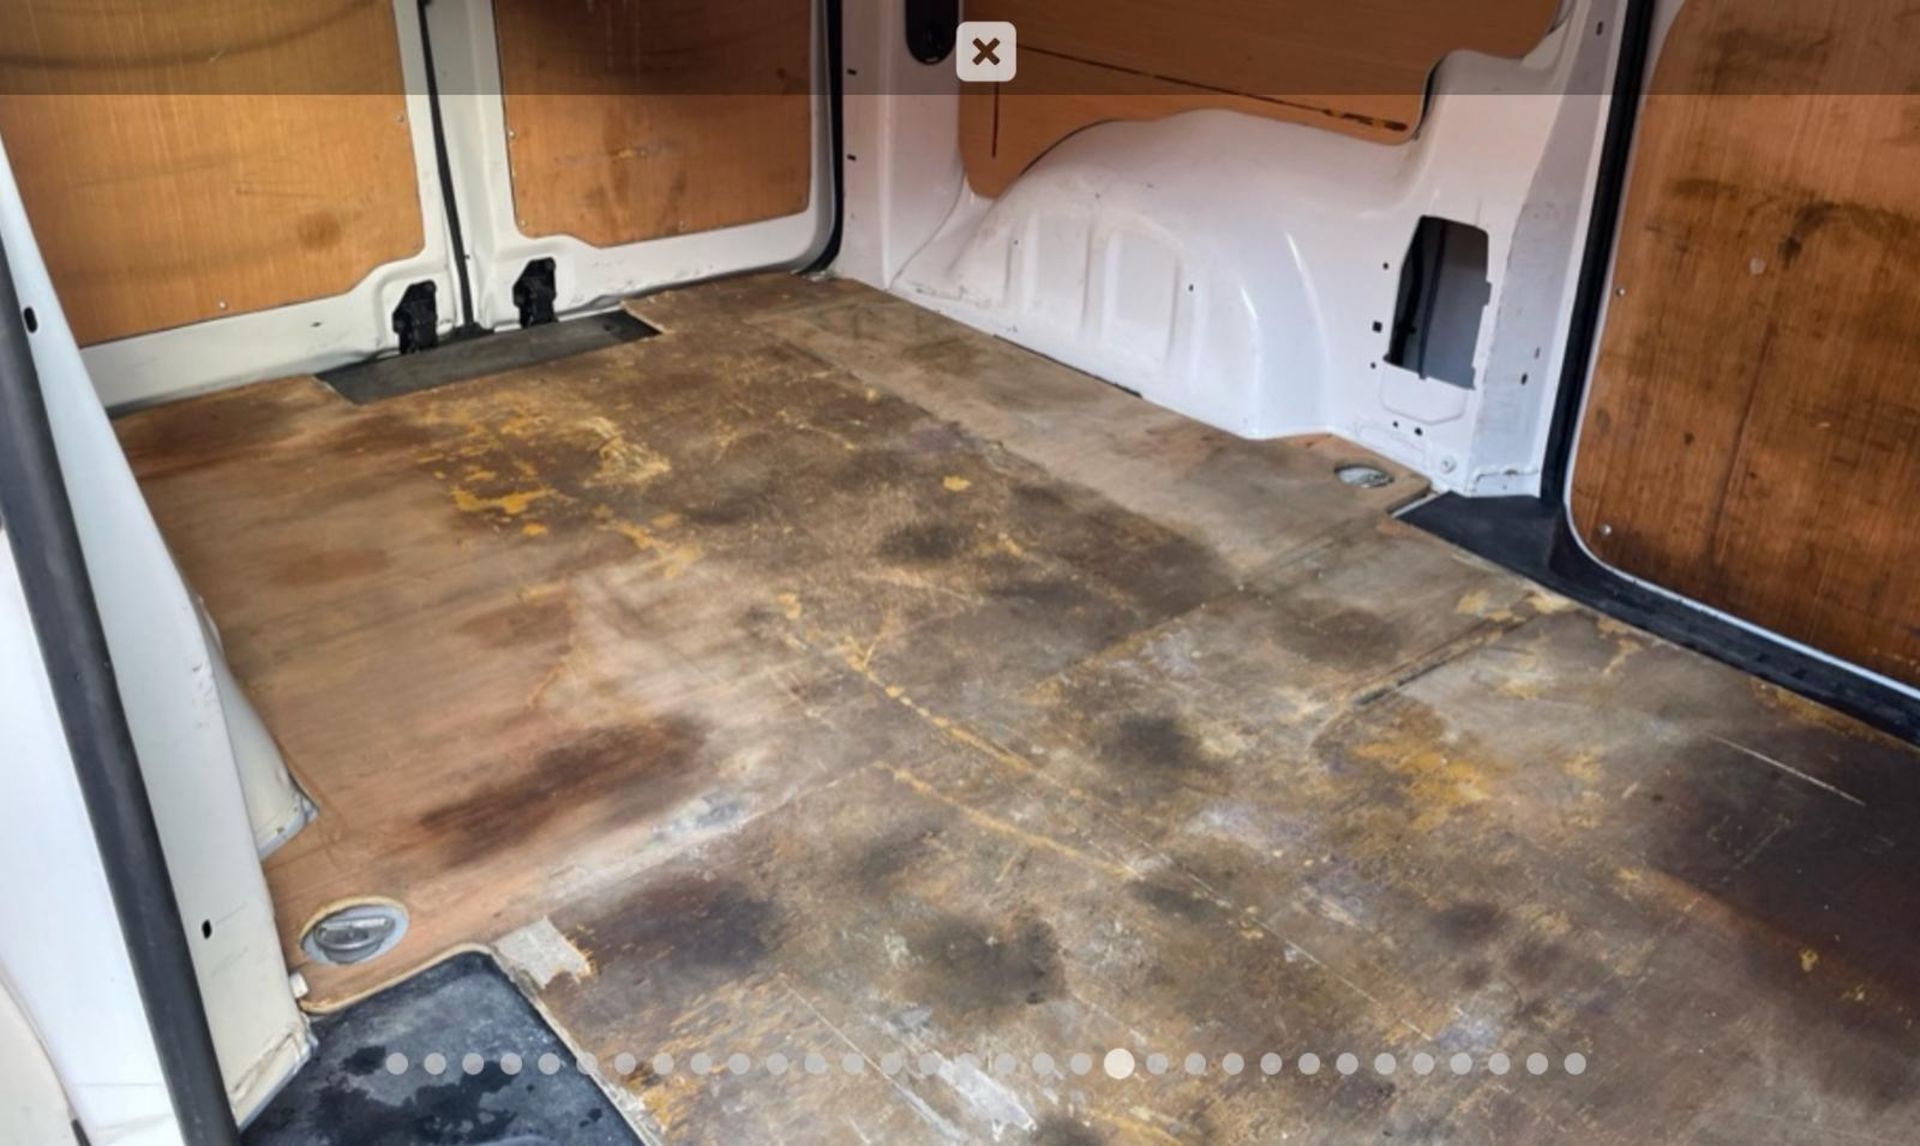 2019 CITROEN DISPATCH 111K MILES -HPI CLEAR -READY FOR WORKE! - Image 7 of 12